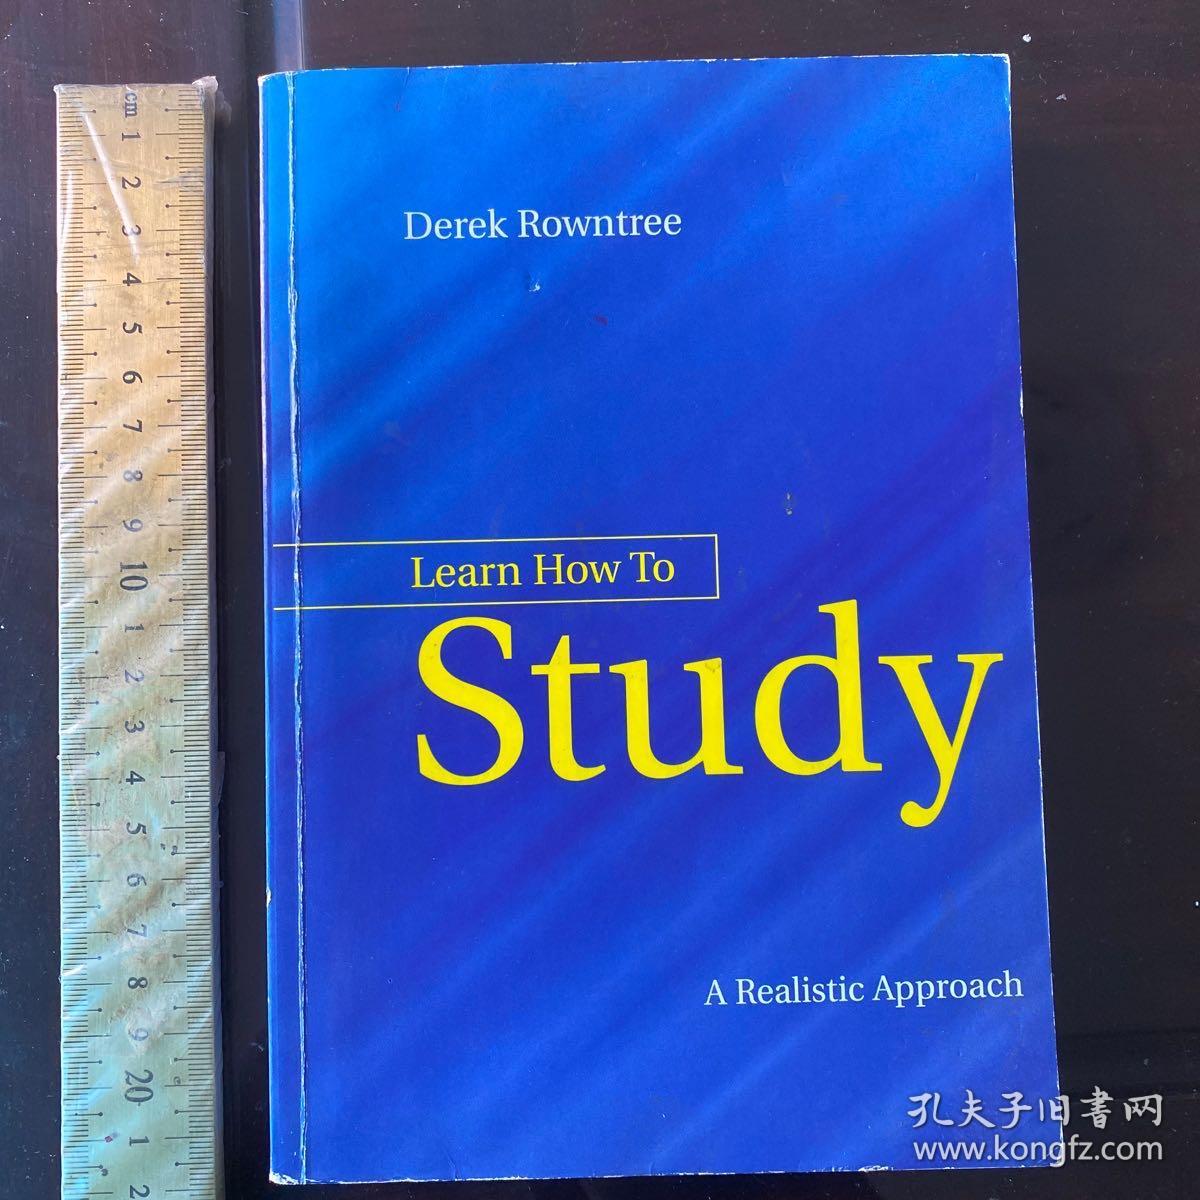 How to study learn a realistic approach learning methods revolution 英文原版